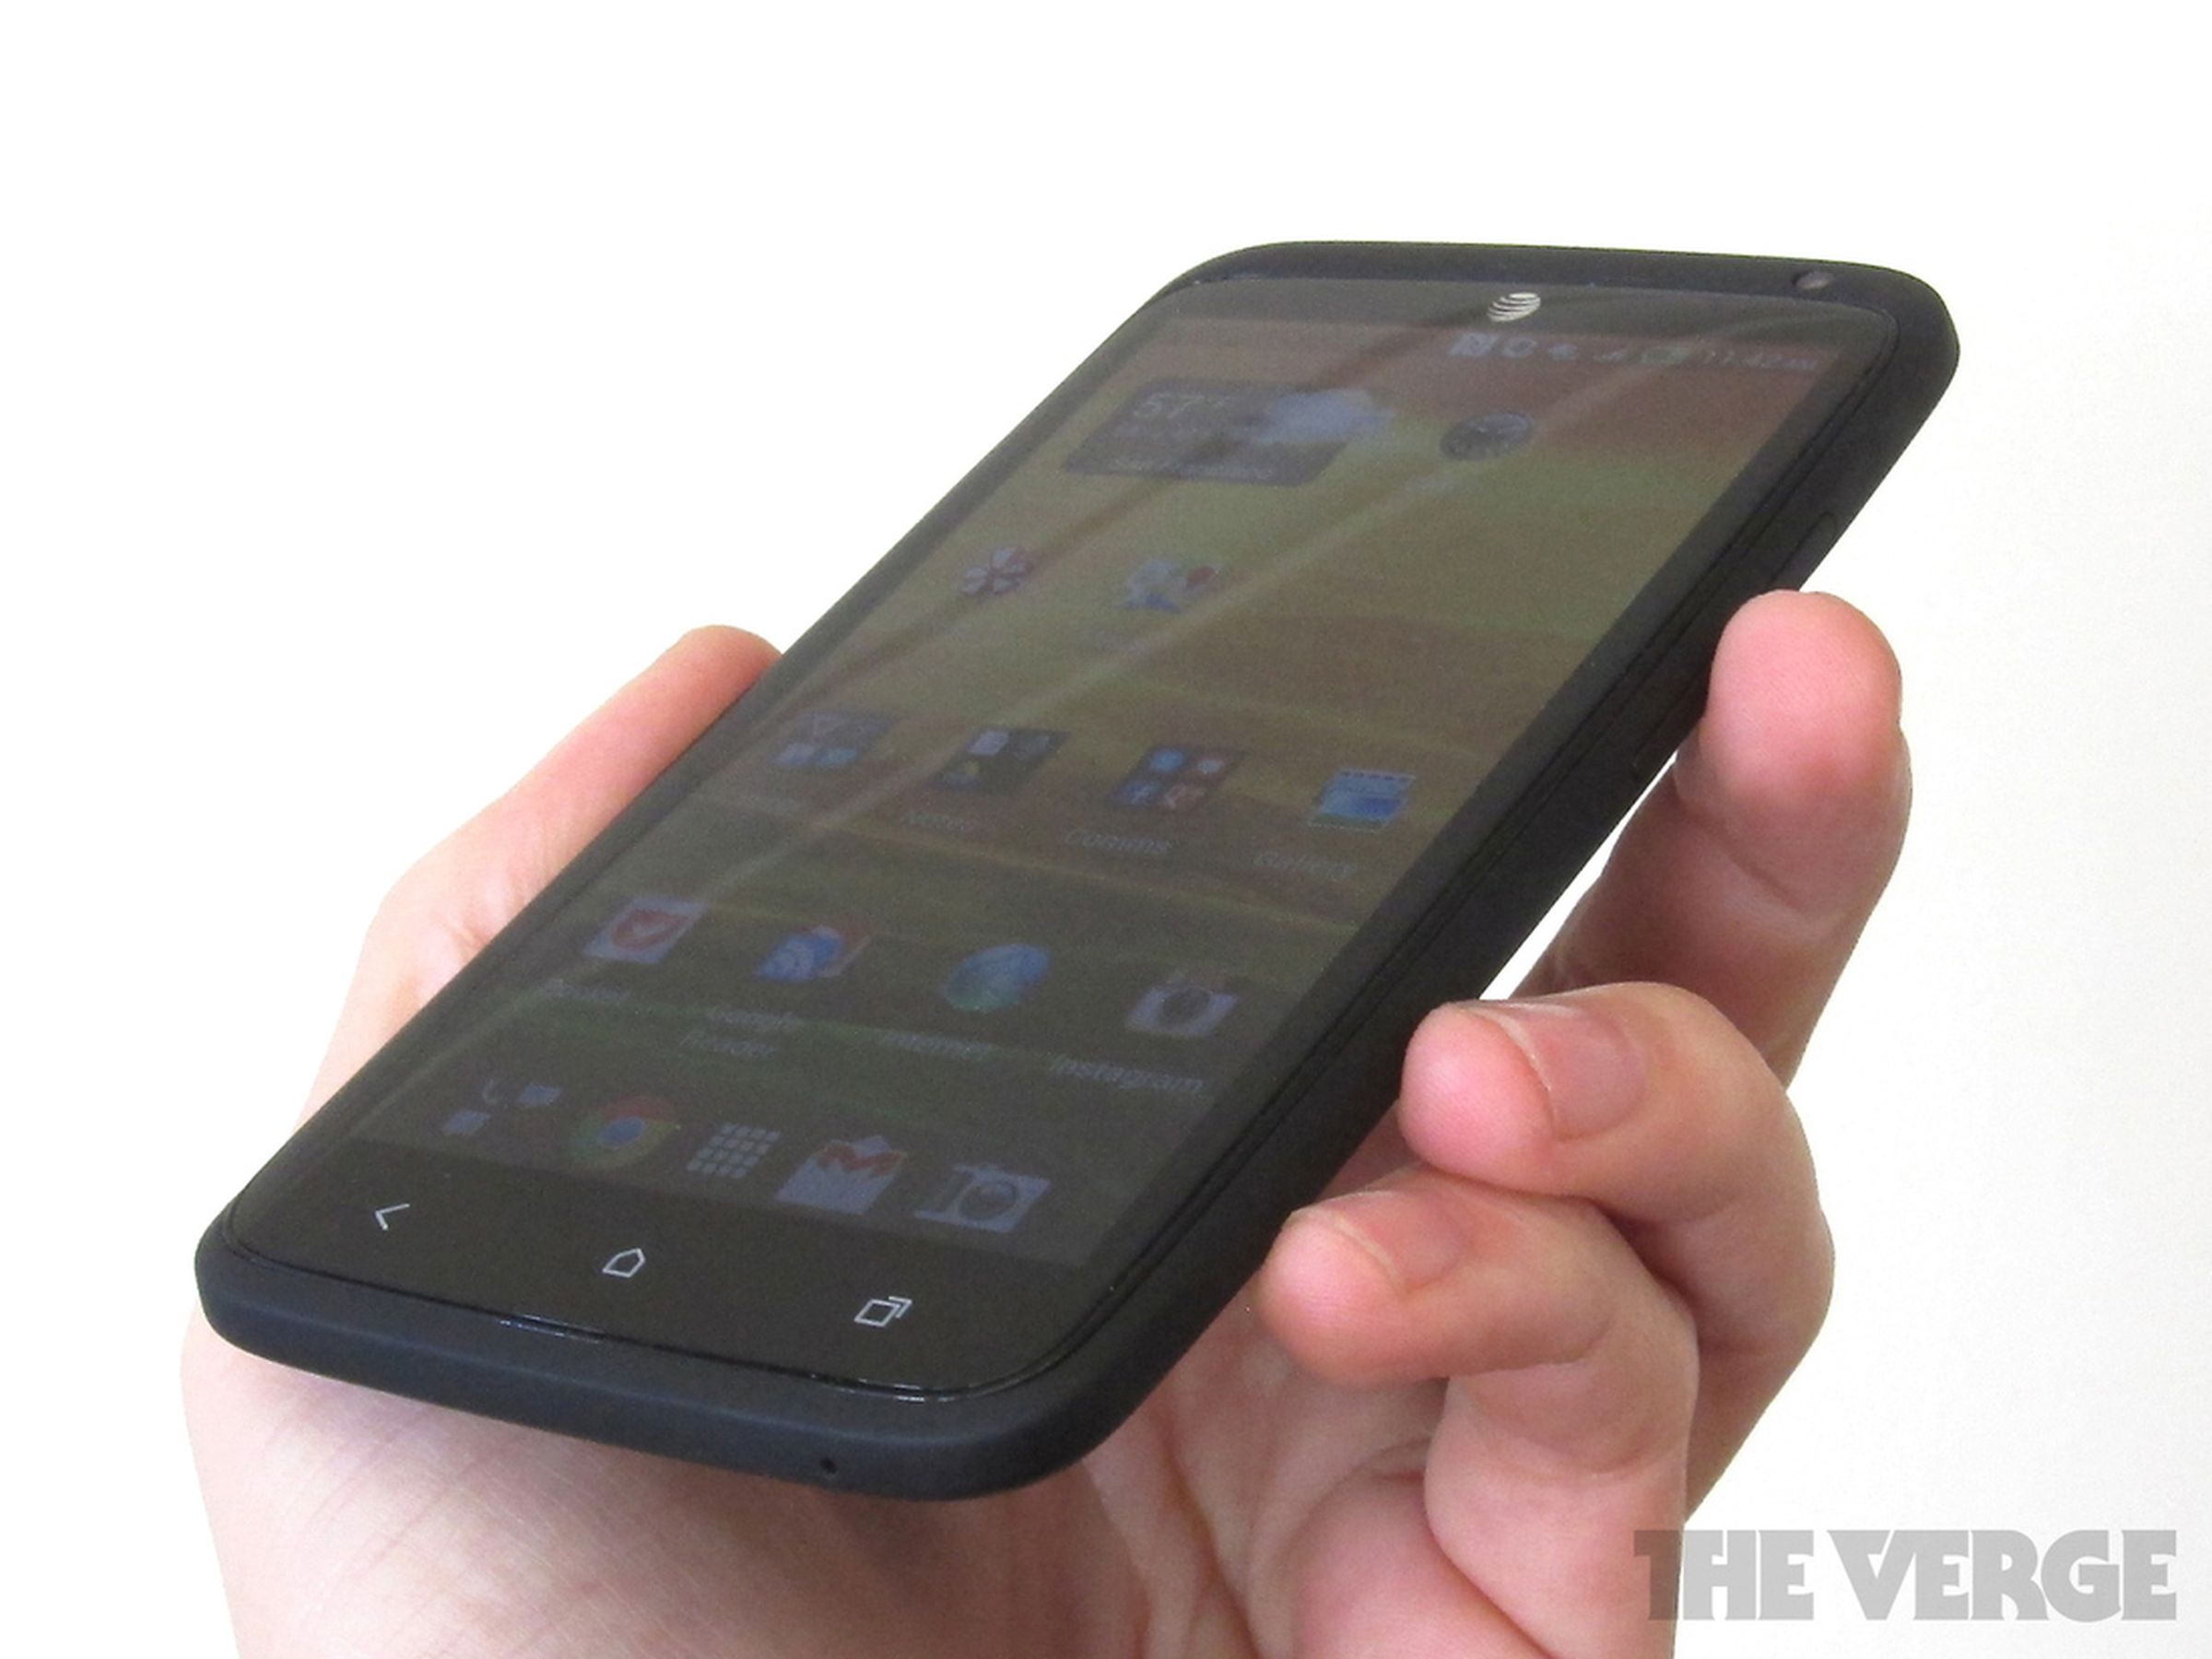 HTC One X+ hands-on review photos